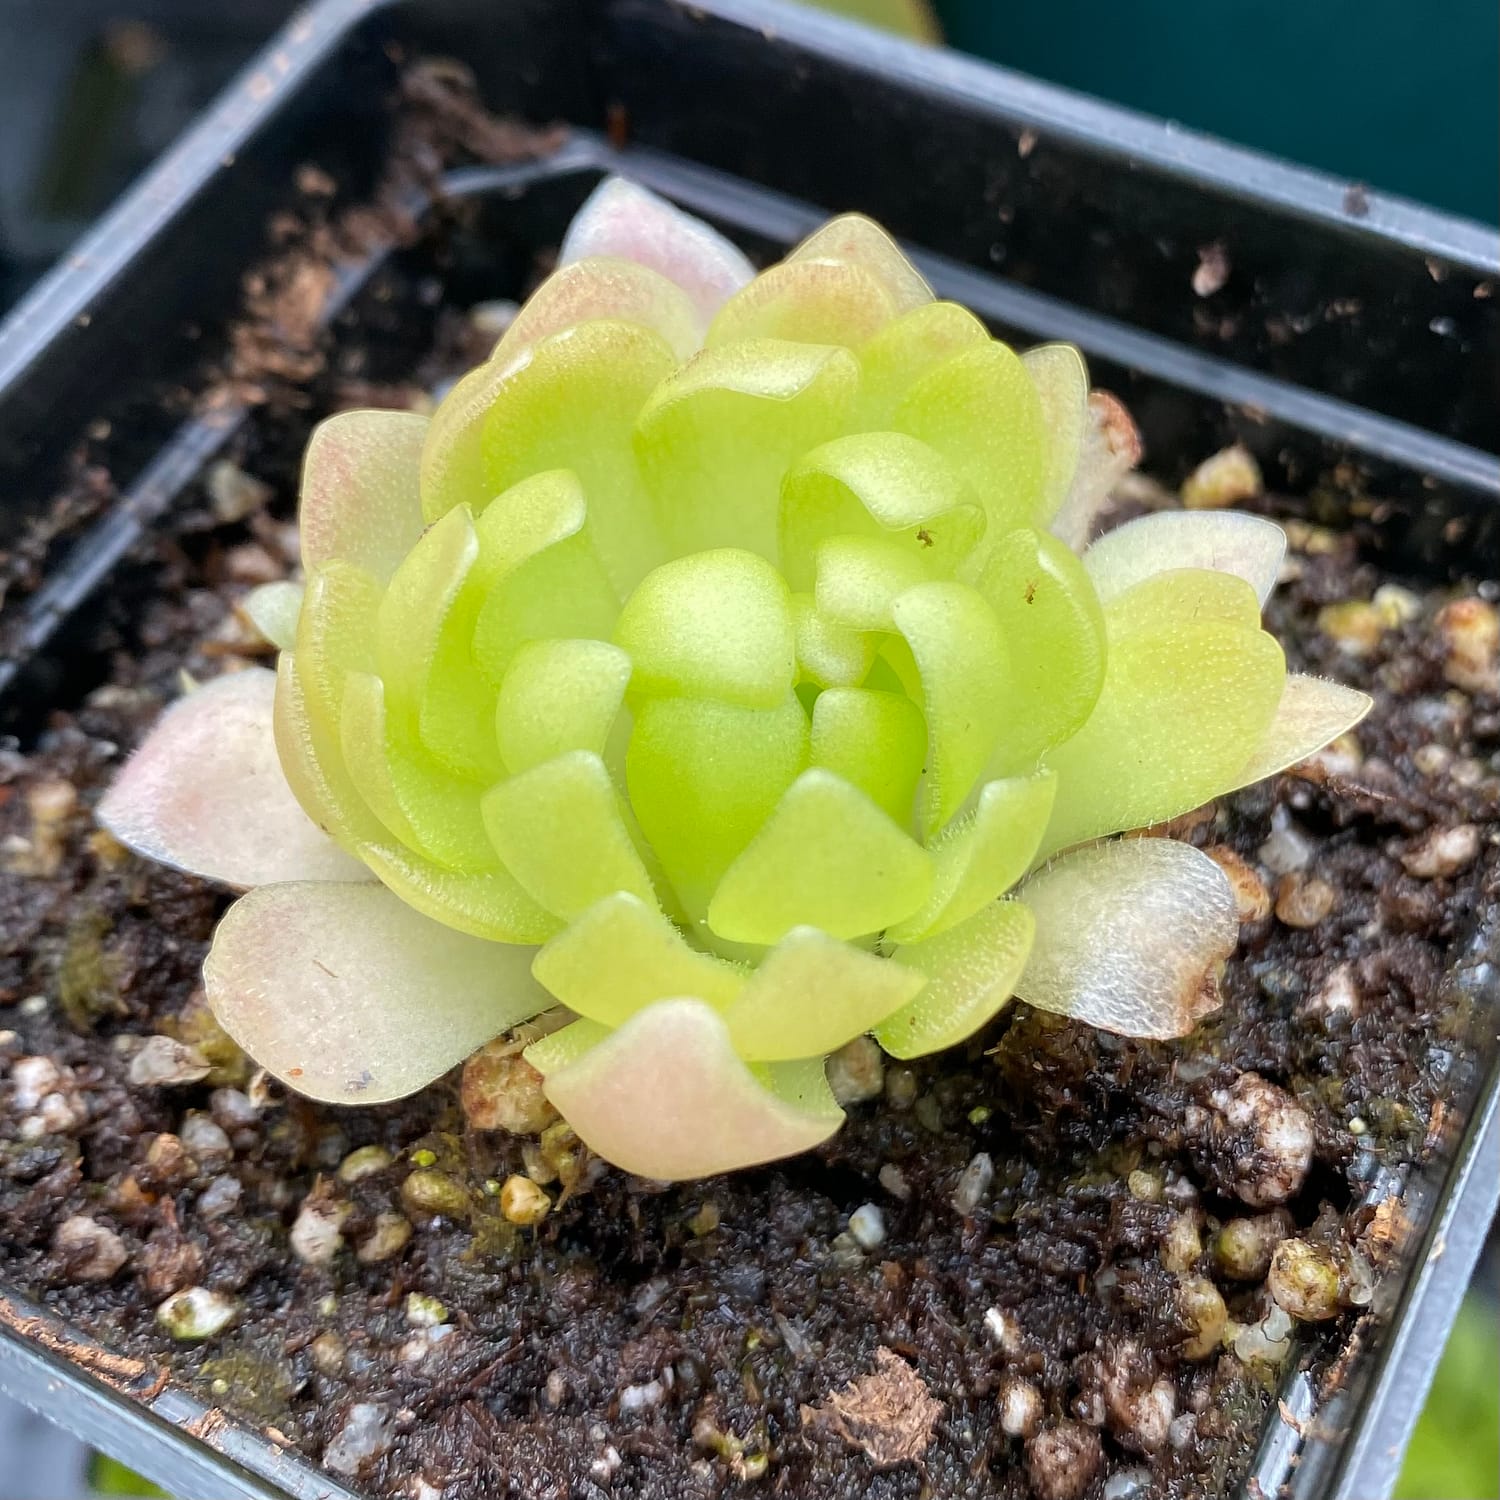 A Pinguicula ‘Marciano’ plant in a black container